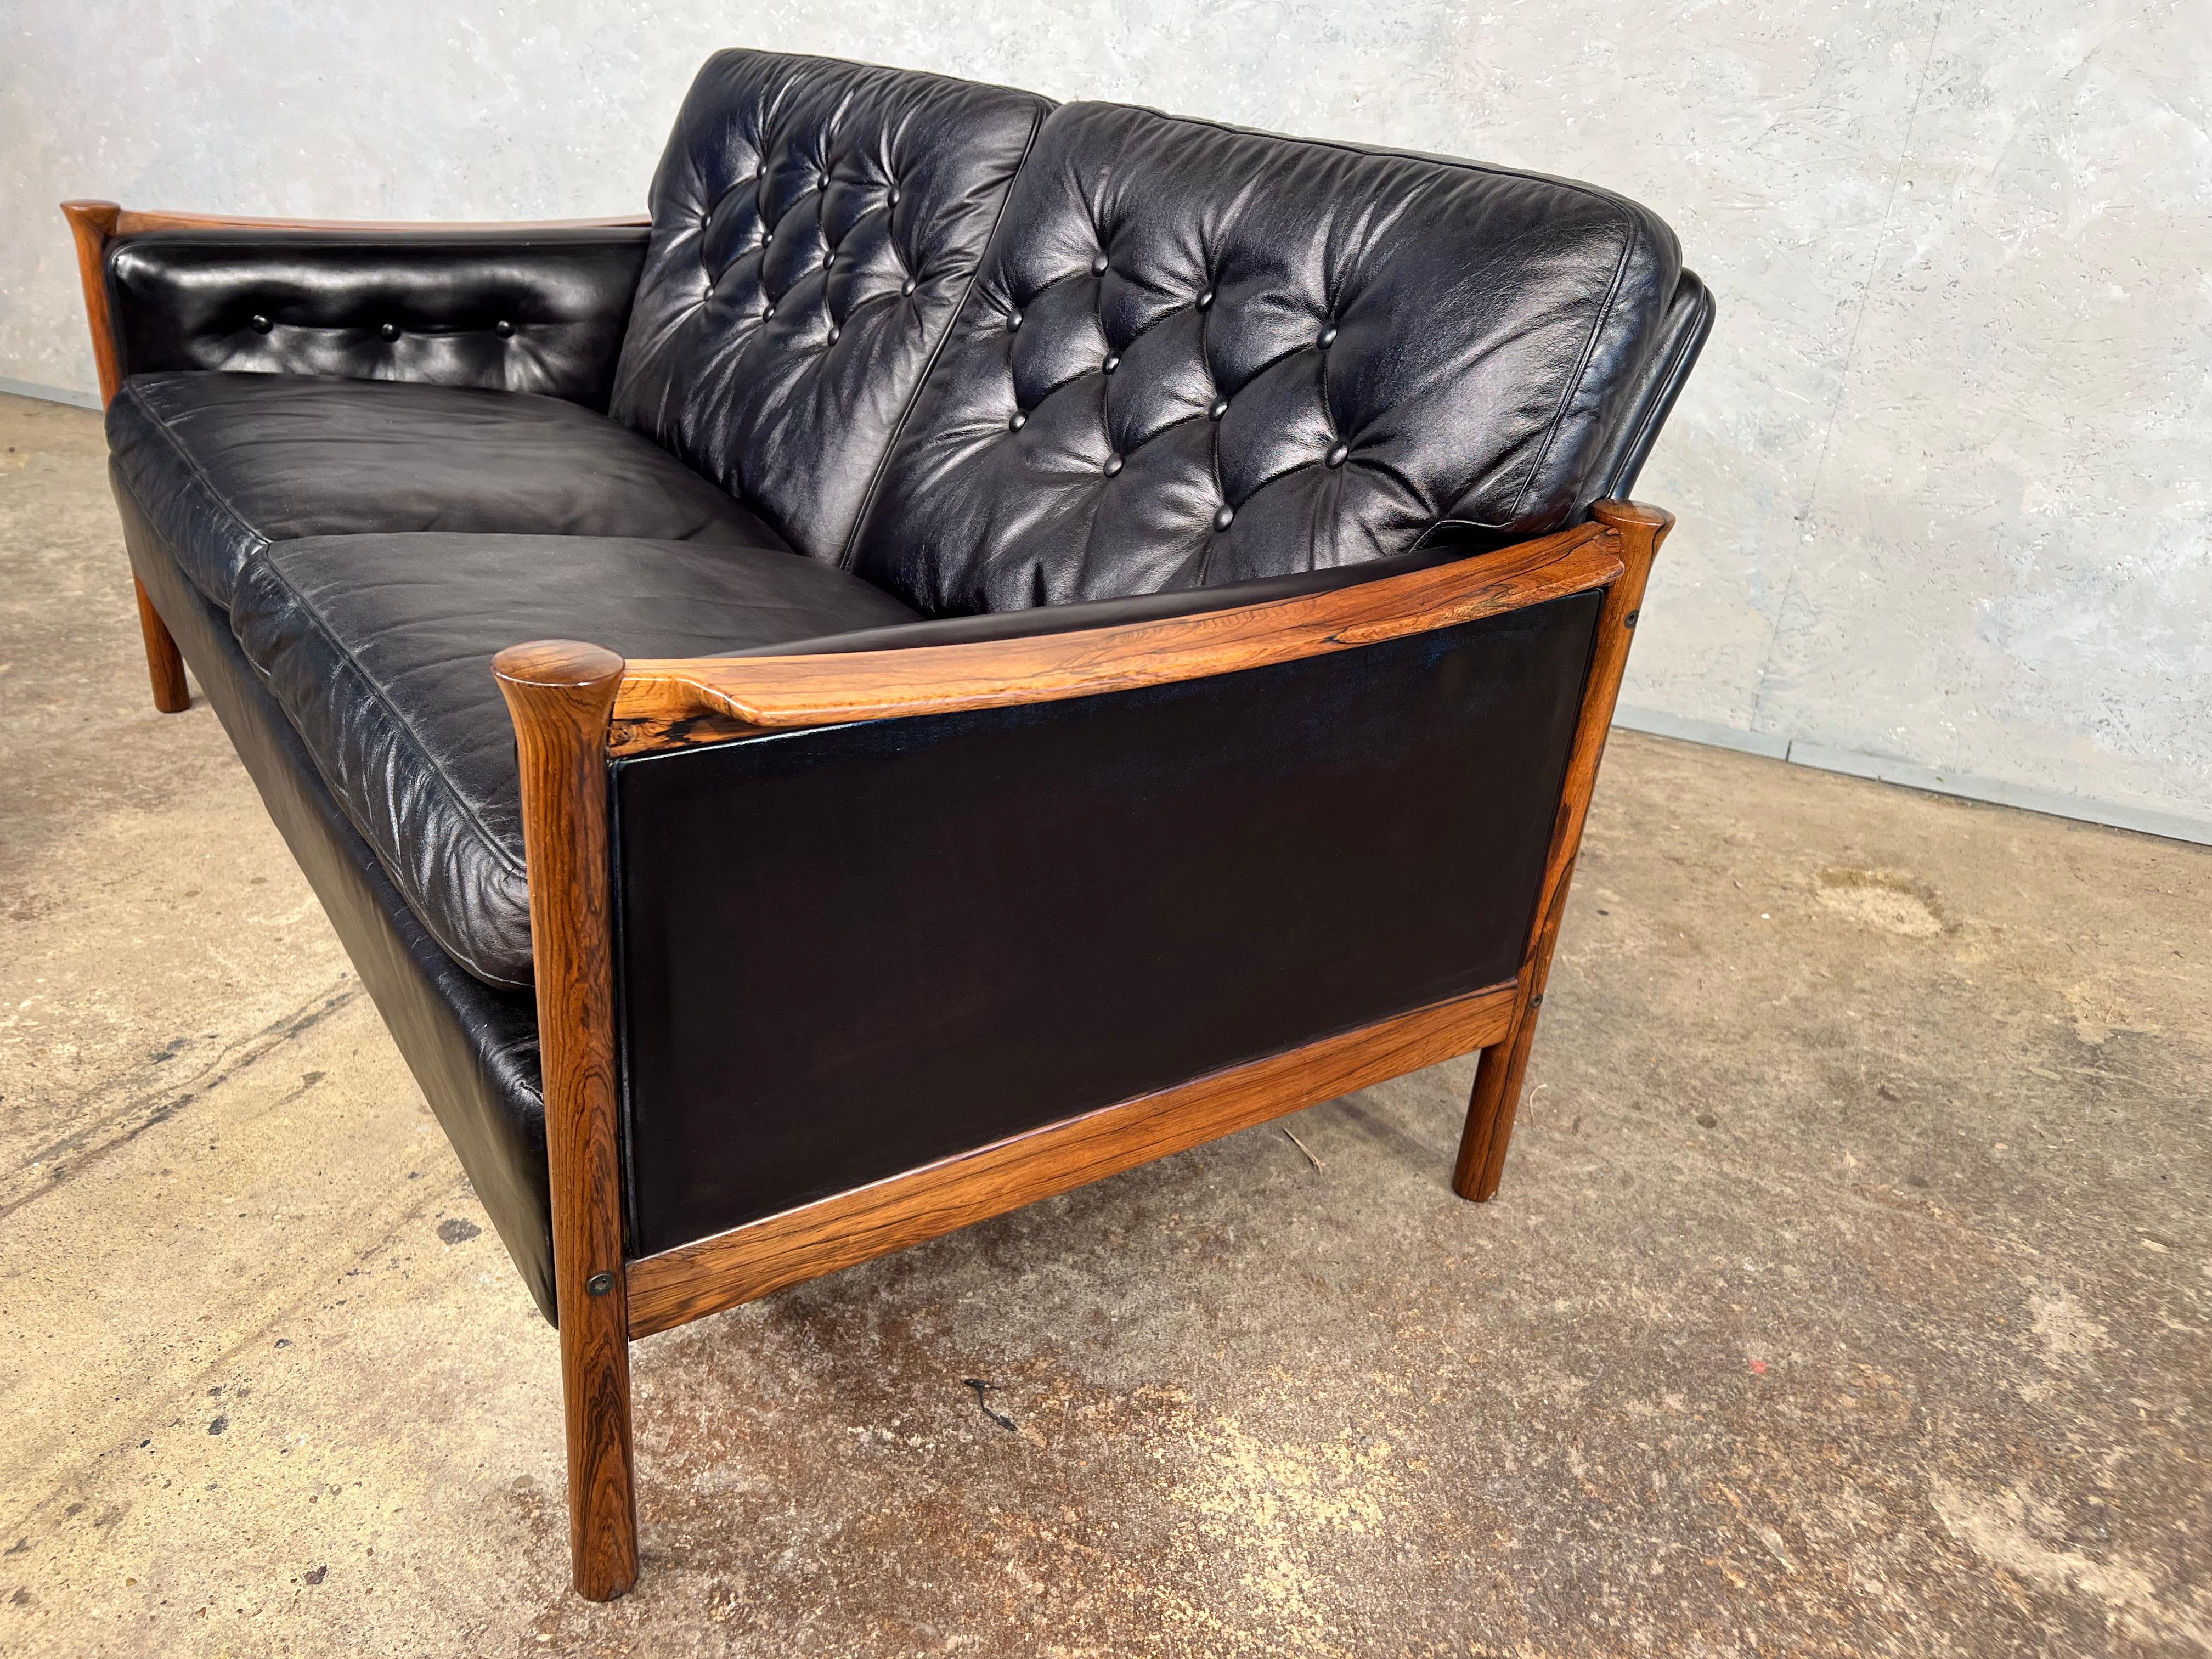 V Neat Two Seater Sofa in Leather by Torbjørn Afdal for Bruksbo Norway 70s #515 For Sale 4